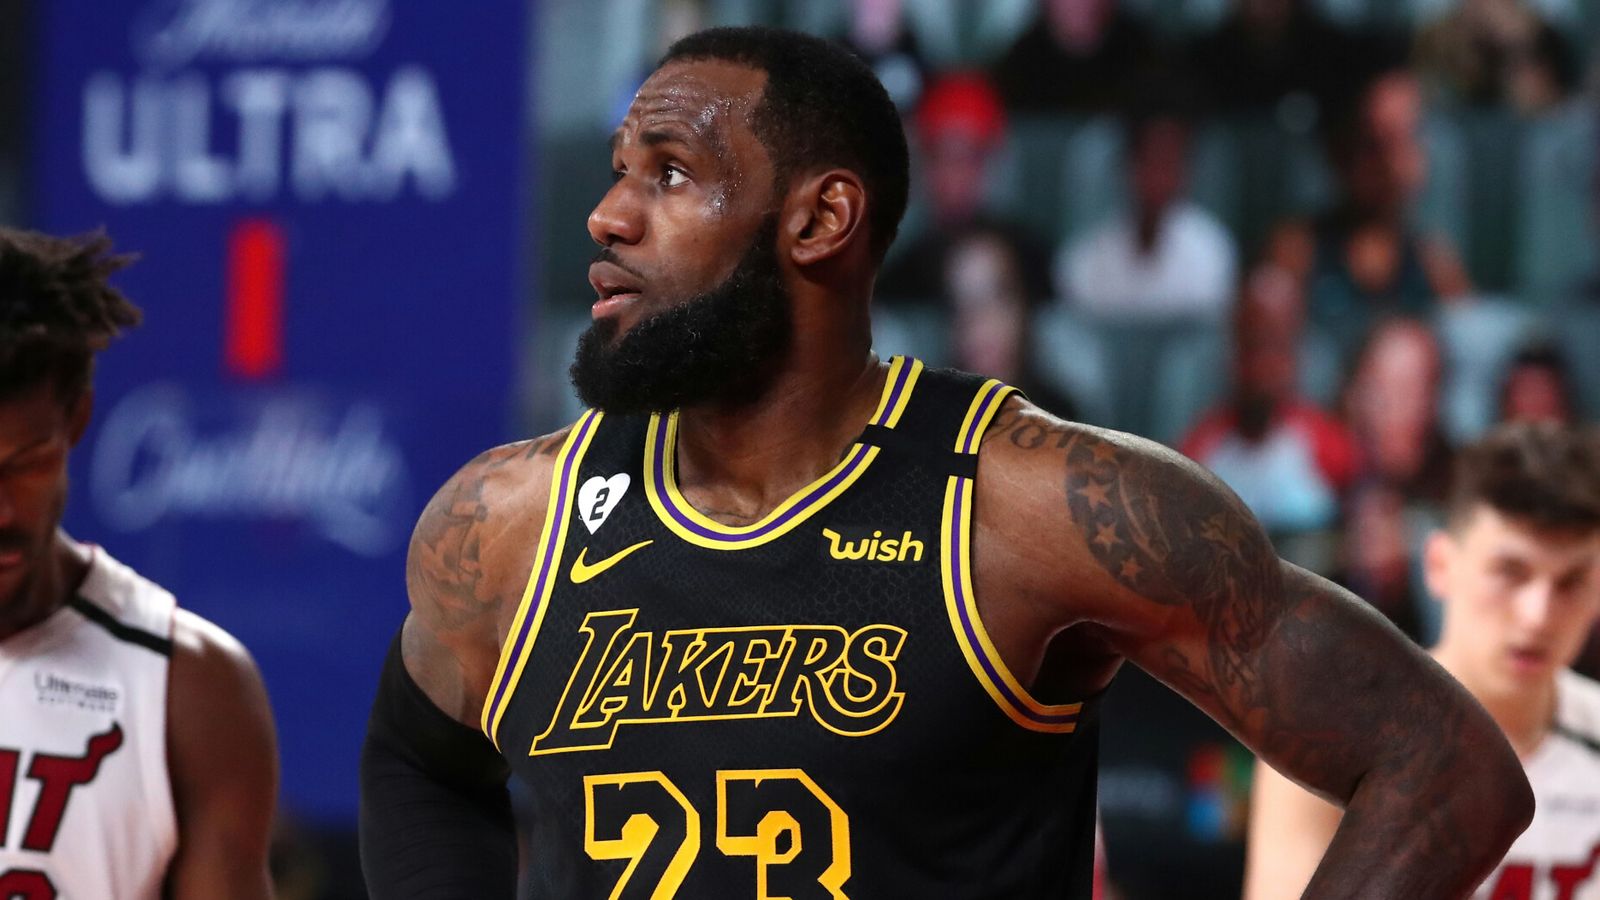 LA Lakers News: LeBron James to change his jersey number - What